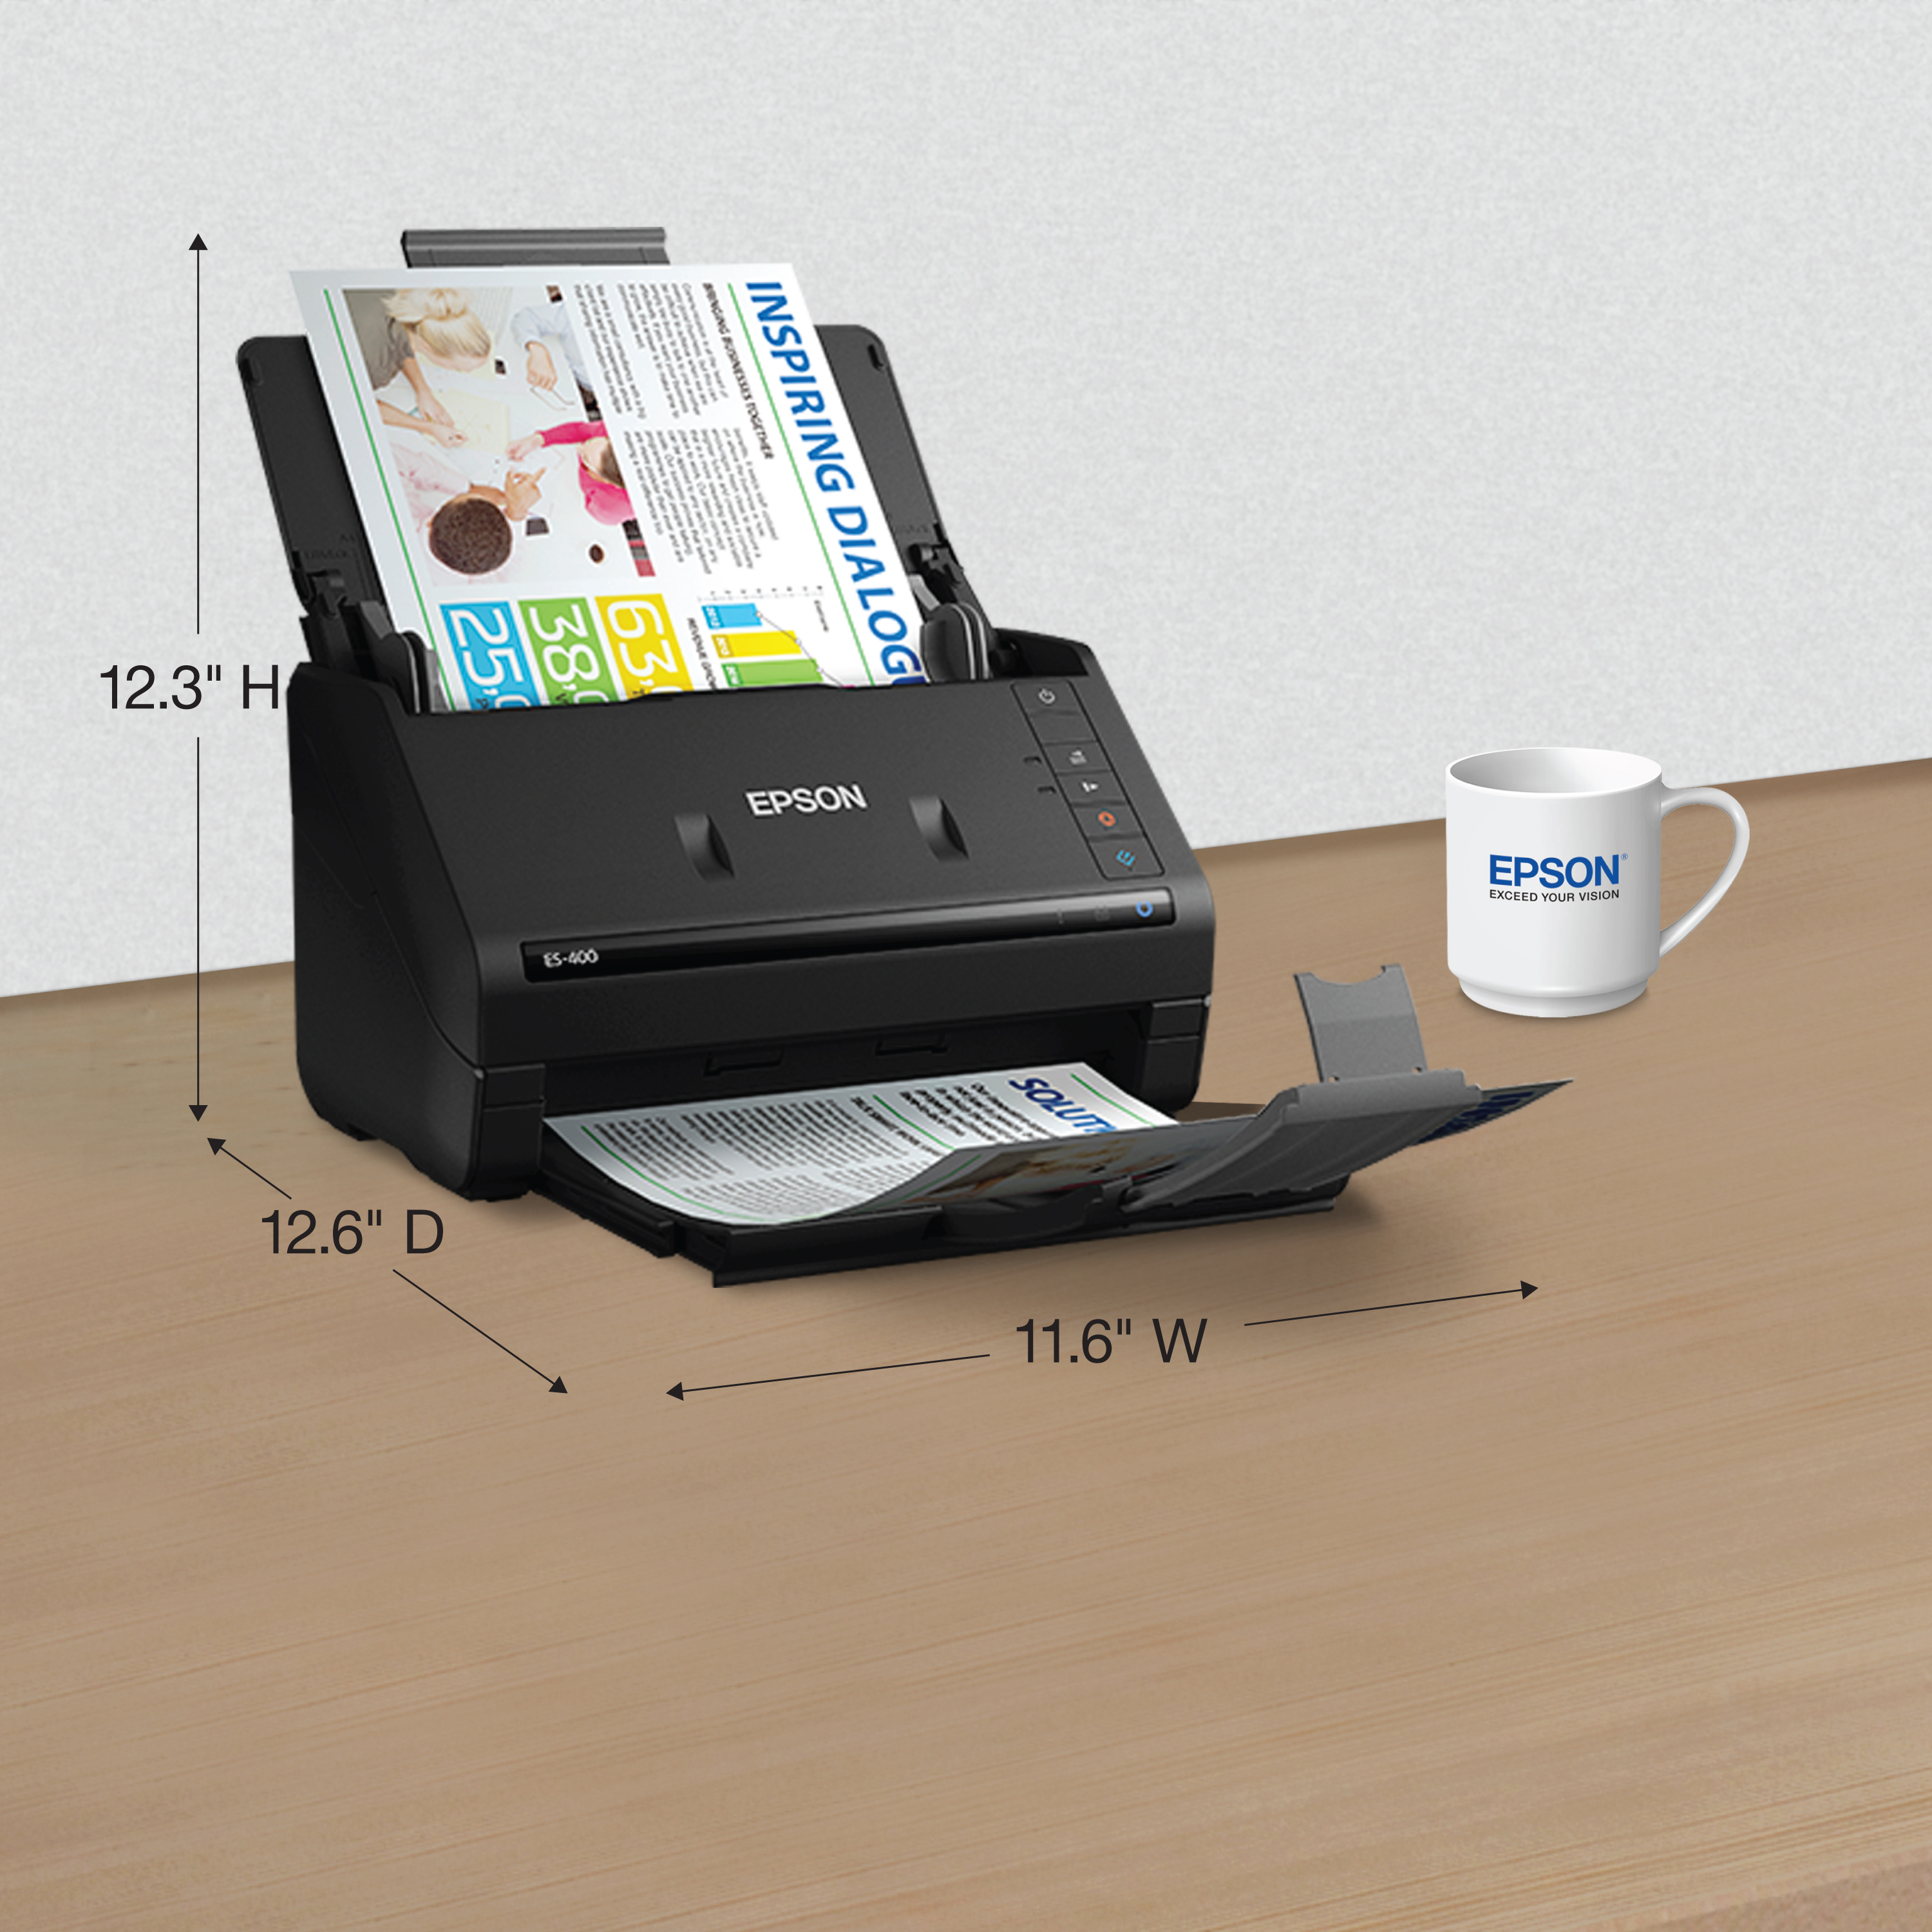 Epson WorkForce ES-400 Color Duplex Document Scanner for PC and Mac, Auto Document Feeder (ADF) - image 5 of 7